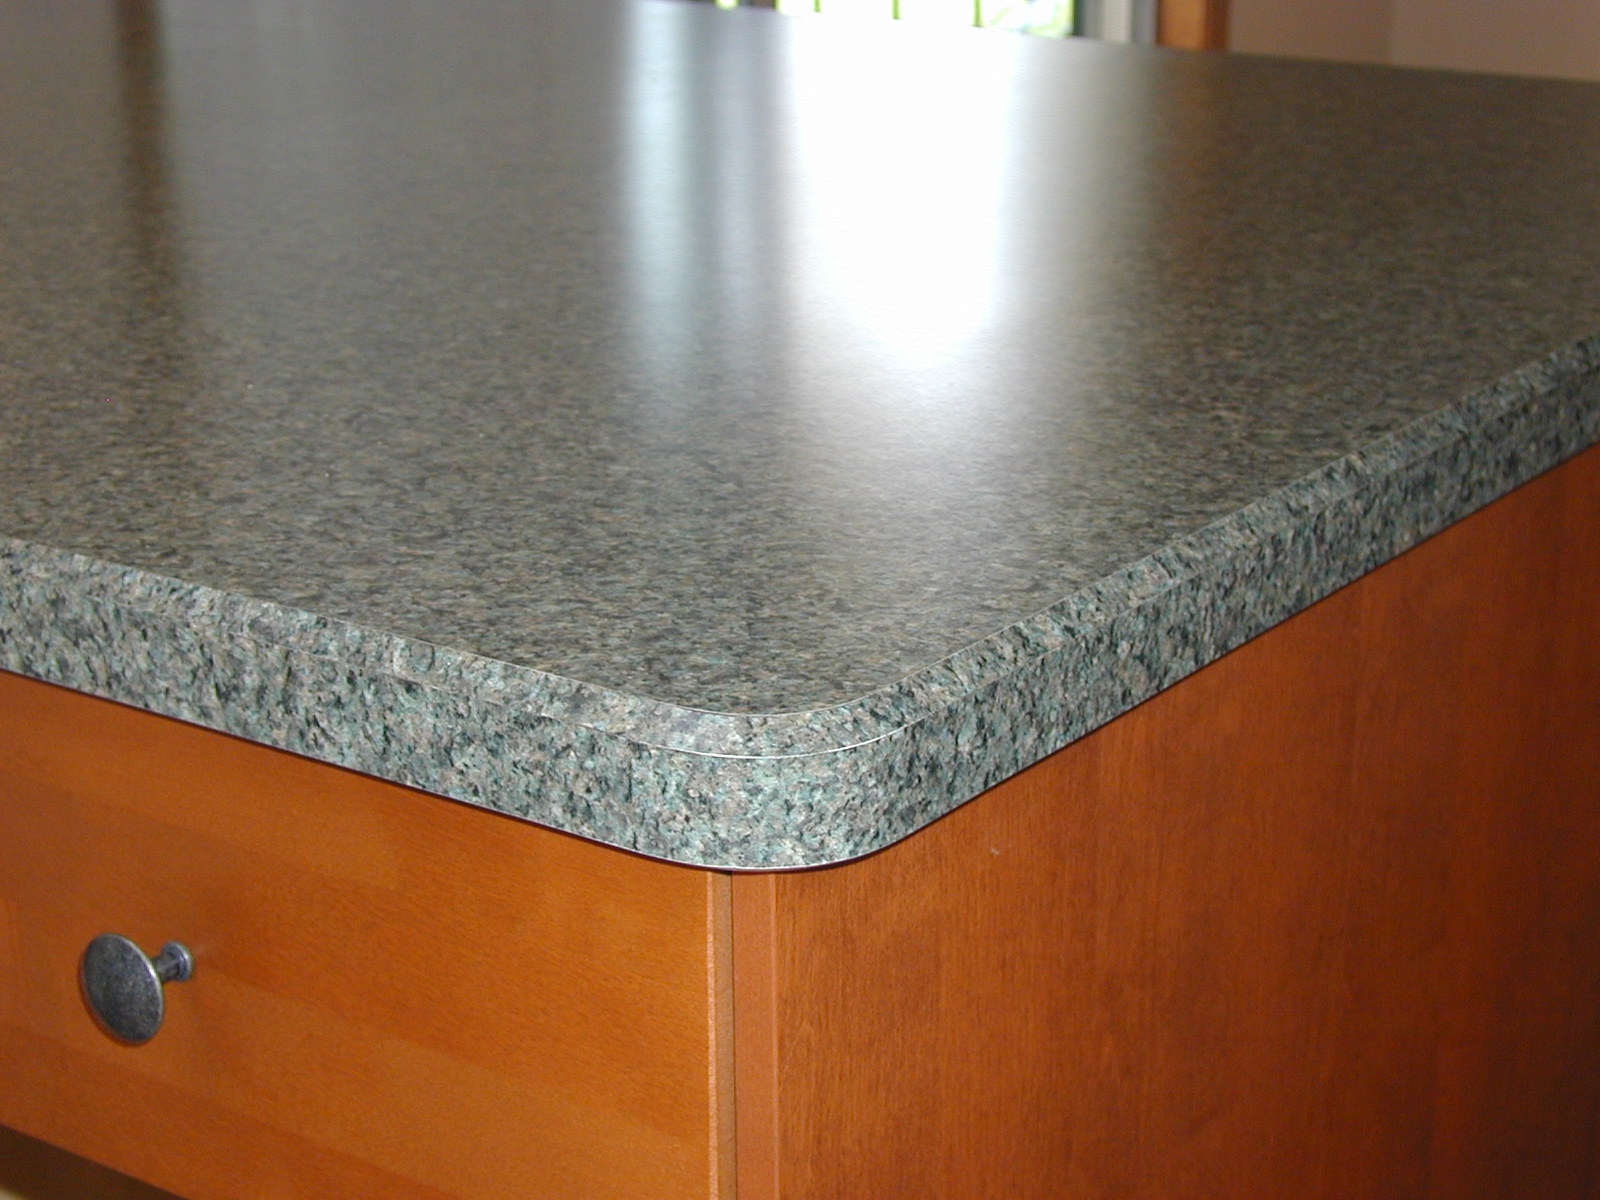 Diy Laminate Countertops Rounded Edges 37 Best Images About Laminate ...